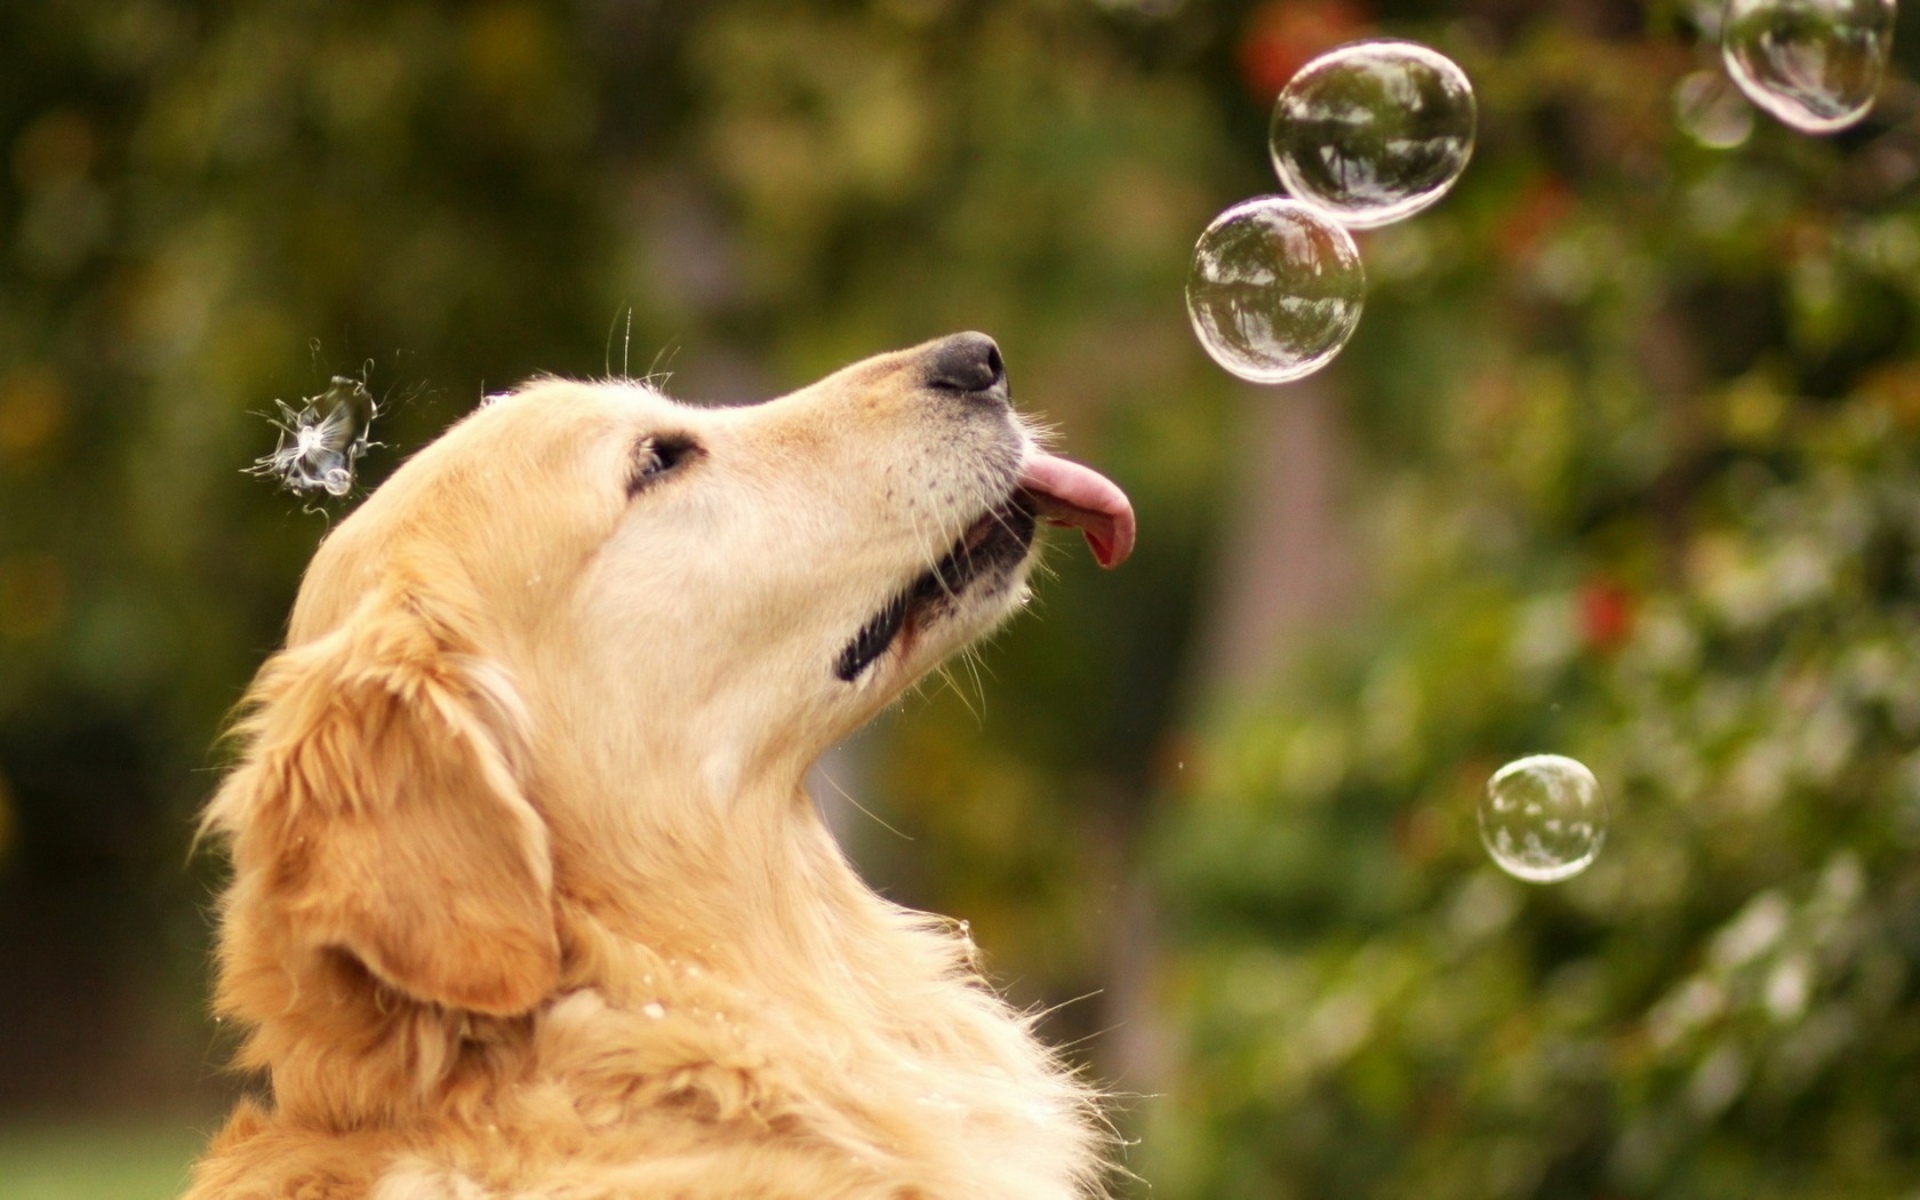 bubbles, Rainbow, Humor, Funny, Animals, Dogs, Canines Wallpaper